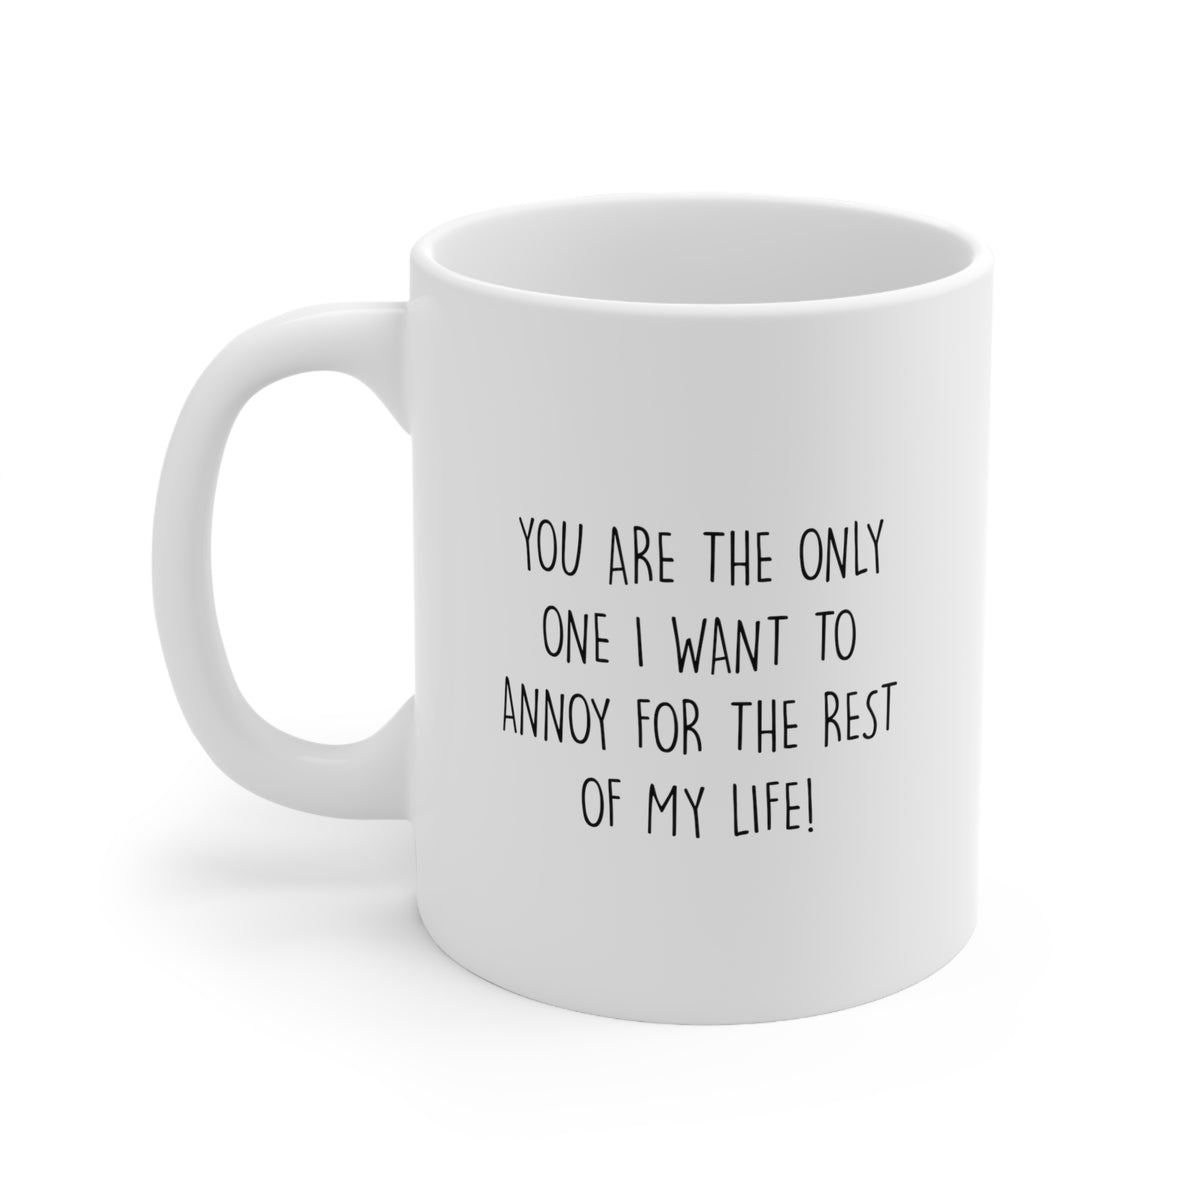 Valentins Day, You Are The Only One I Want To Annoy For The Rest Of My Life, Funny Coffee Mug For Him Her, Love Cup For Wife Husband